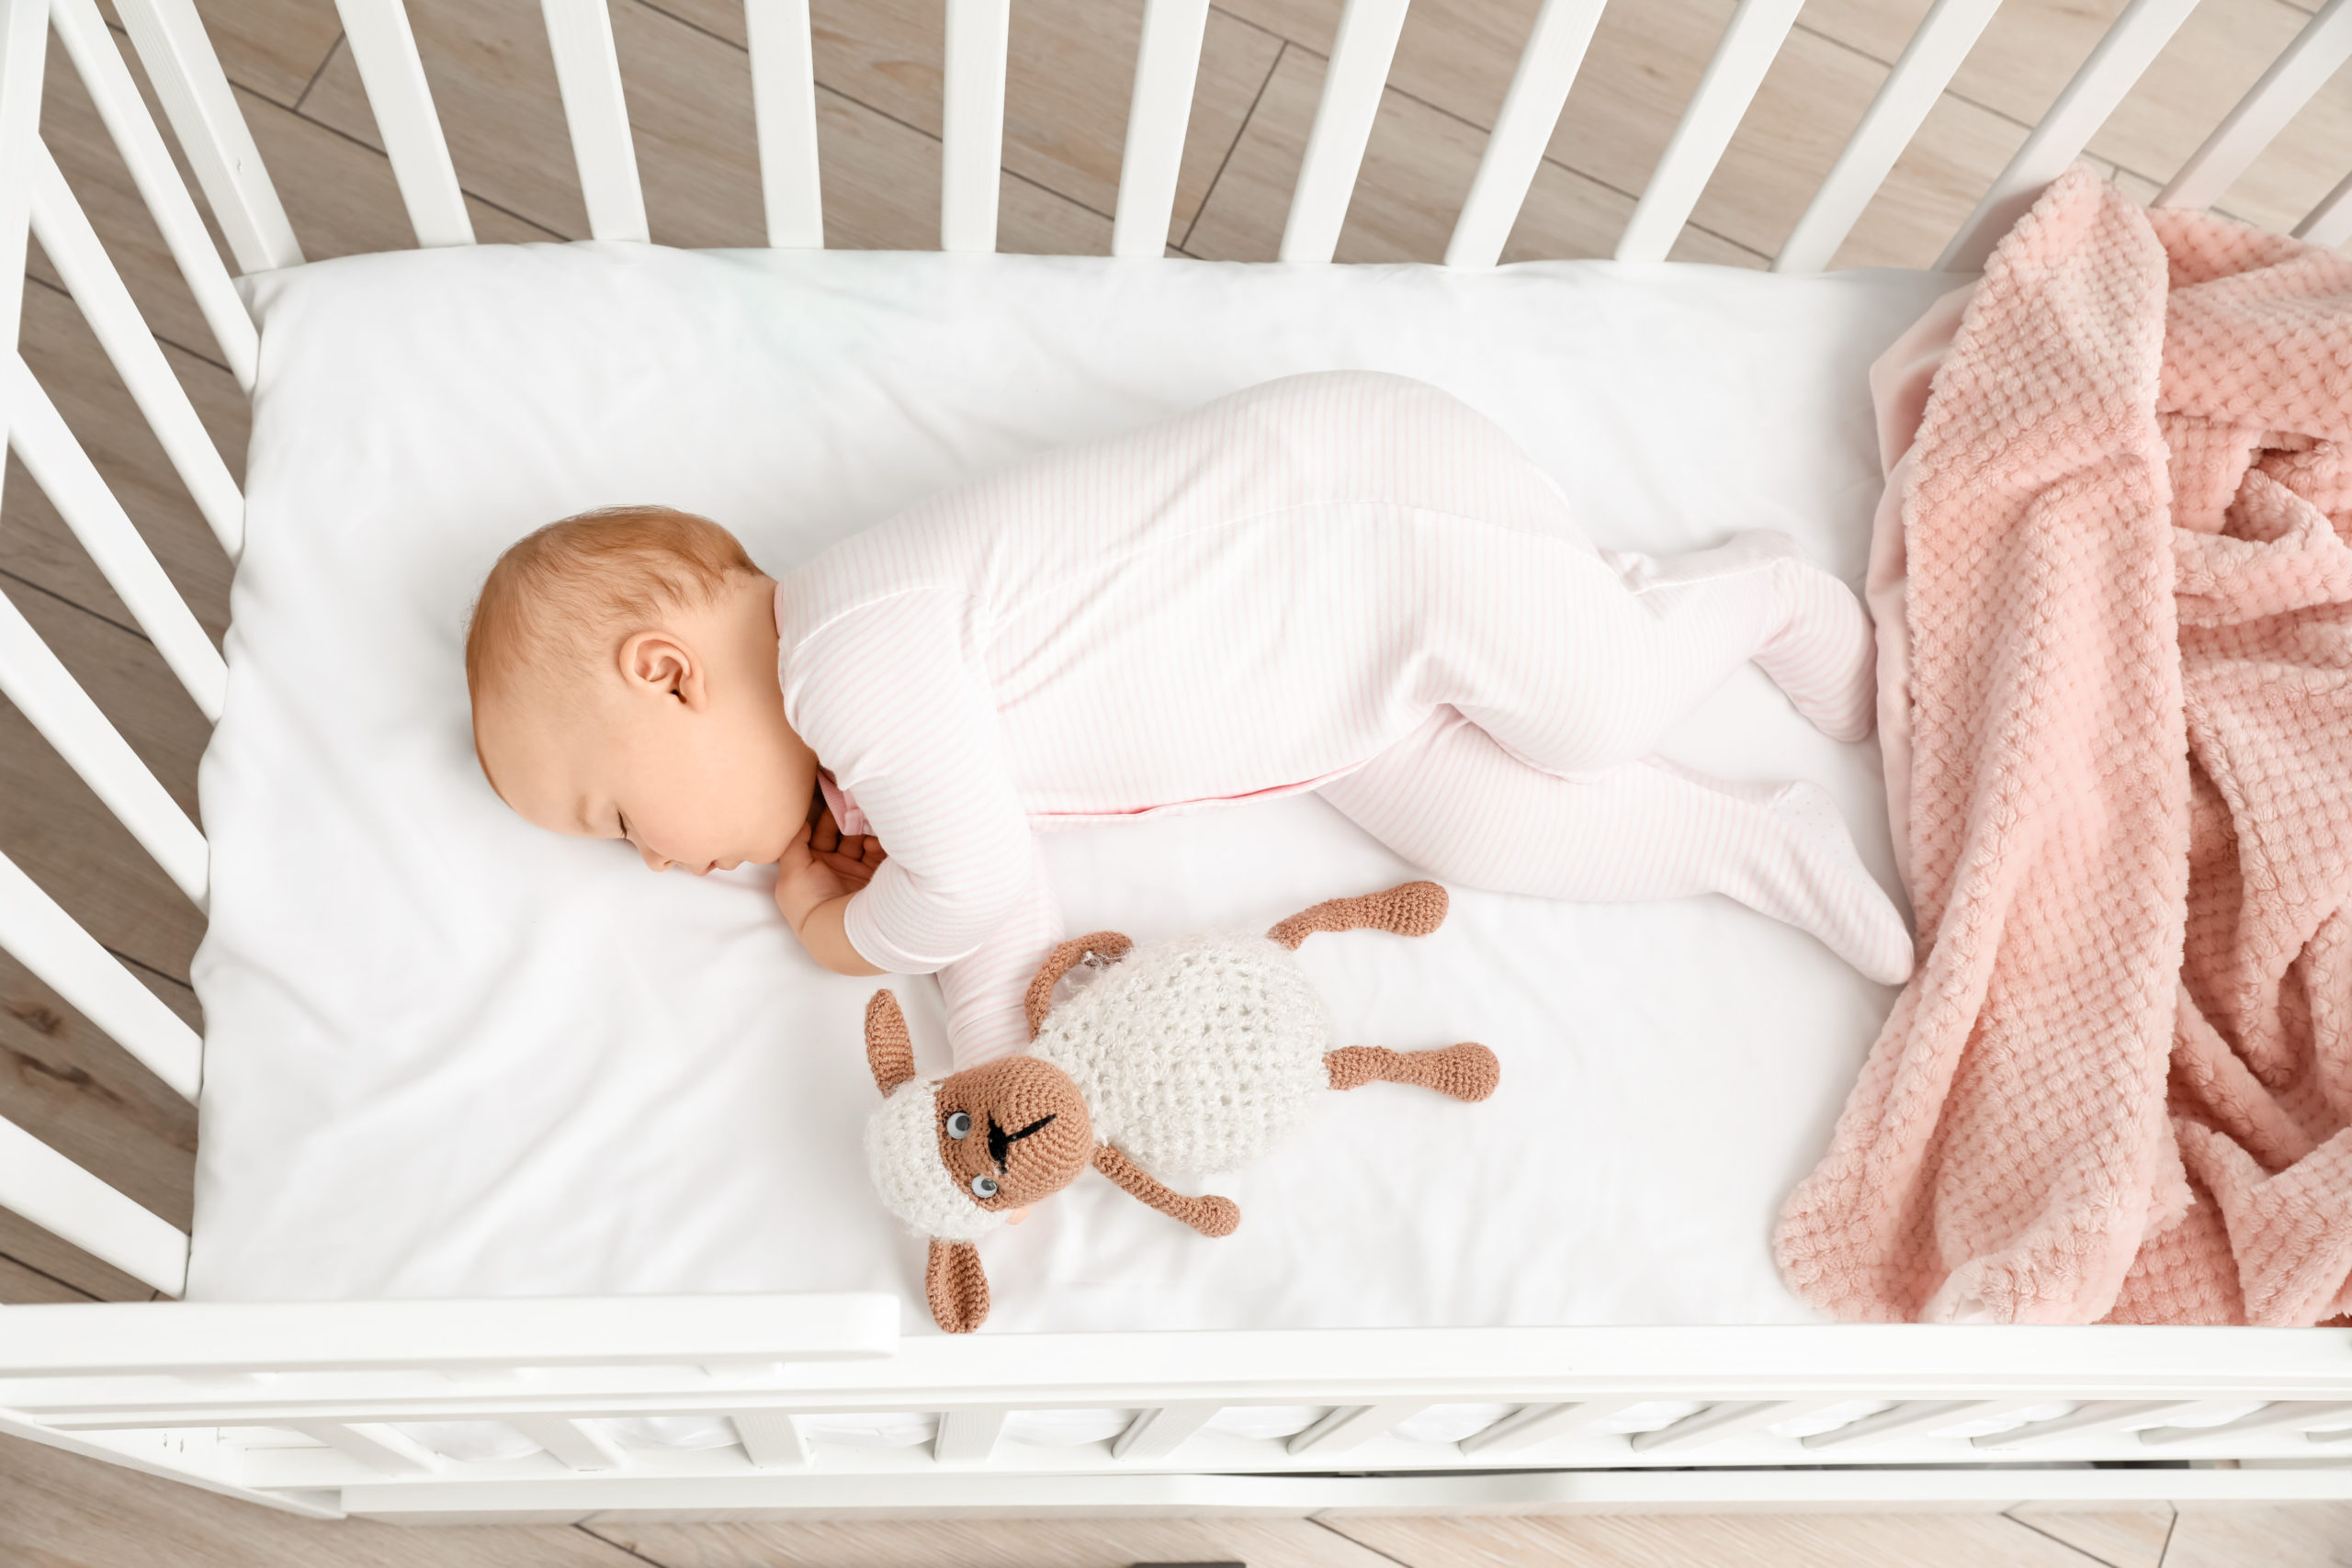 Incorrect laying and bedding increases infant mortality #1